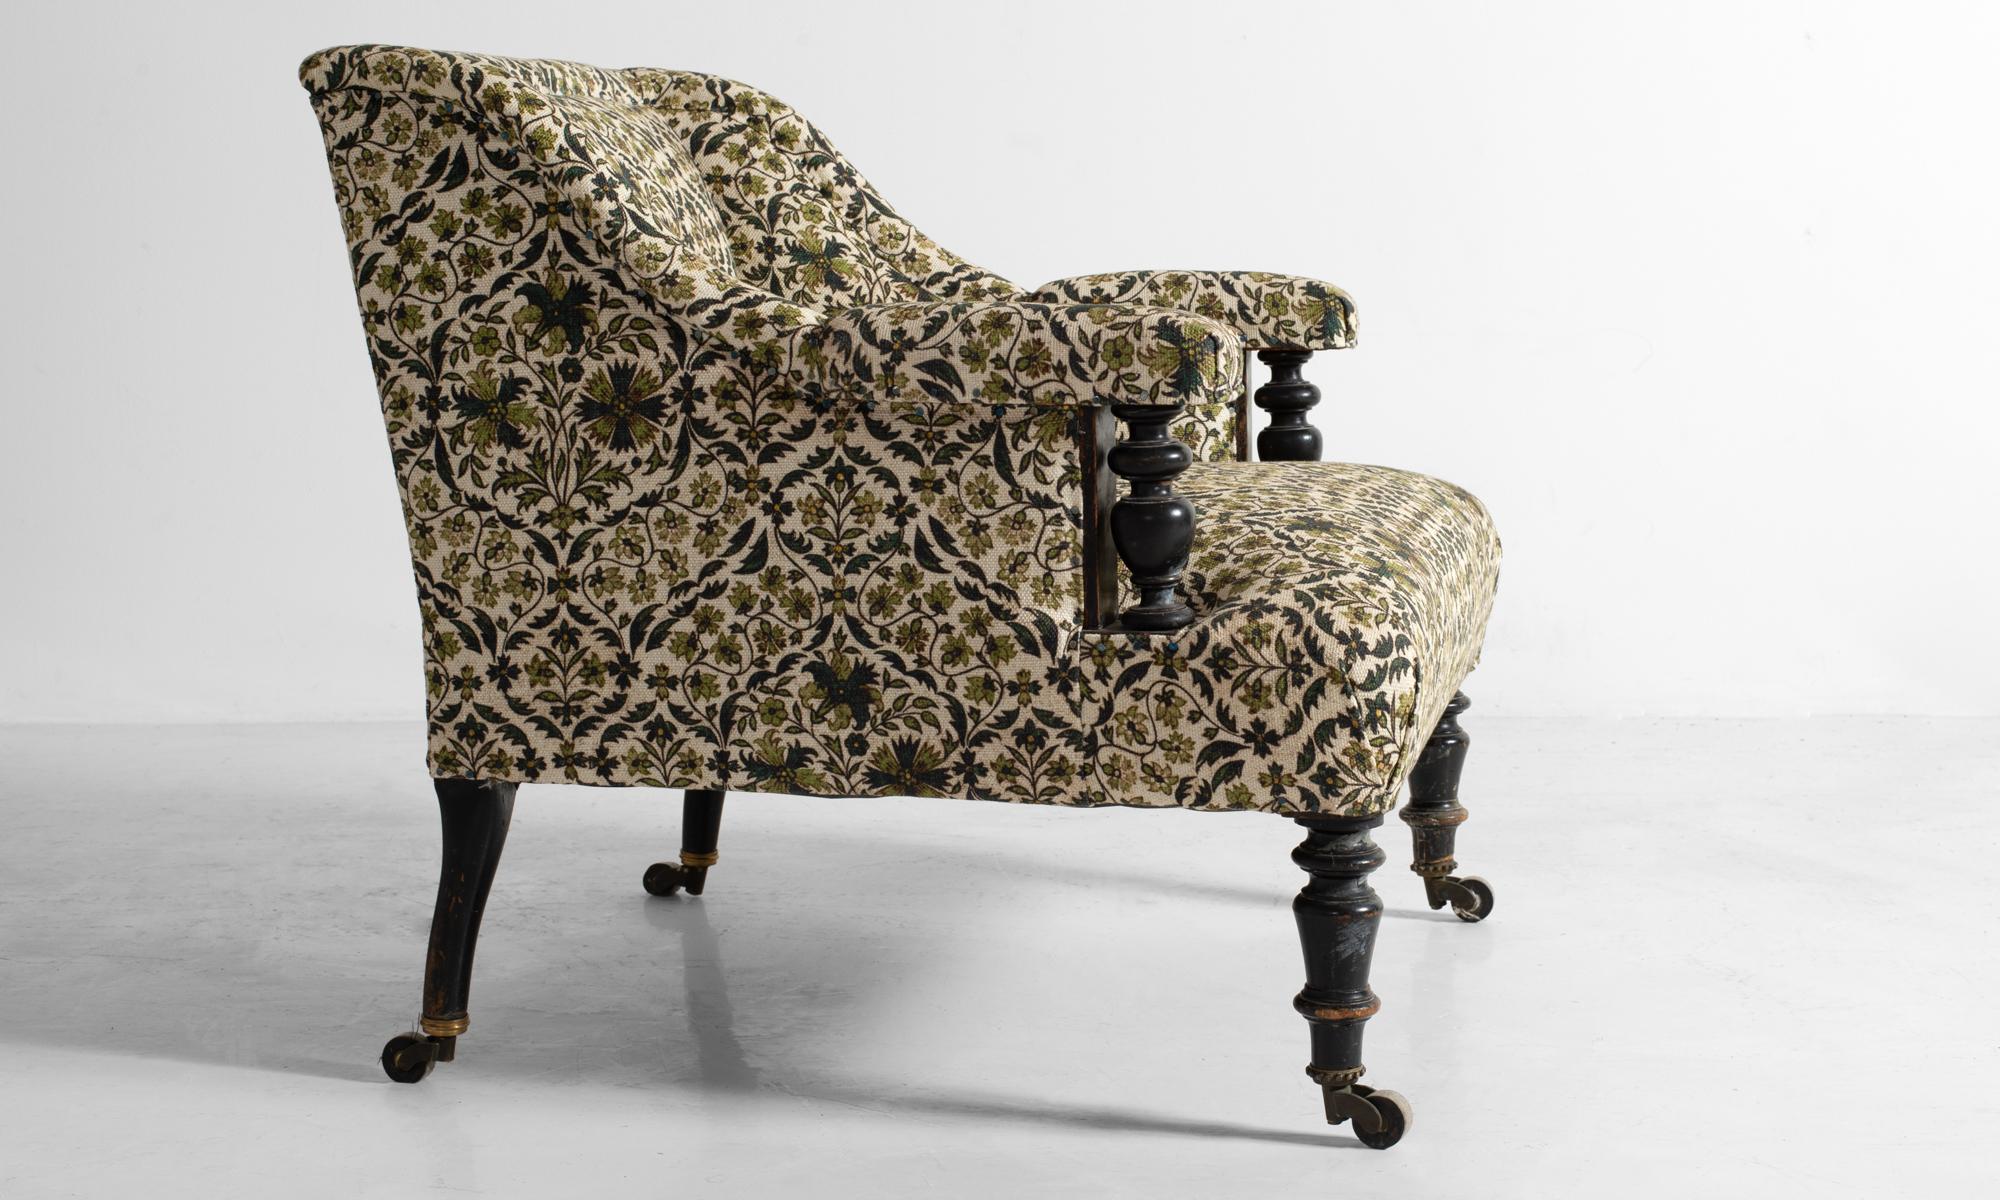 French Petite Chair, France, circa 1890